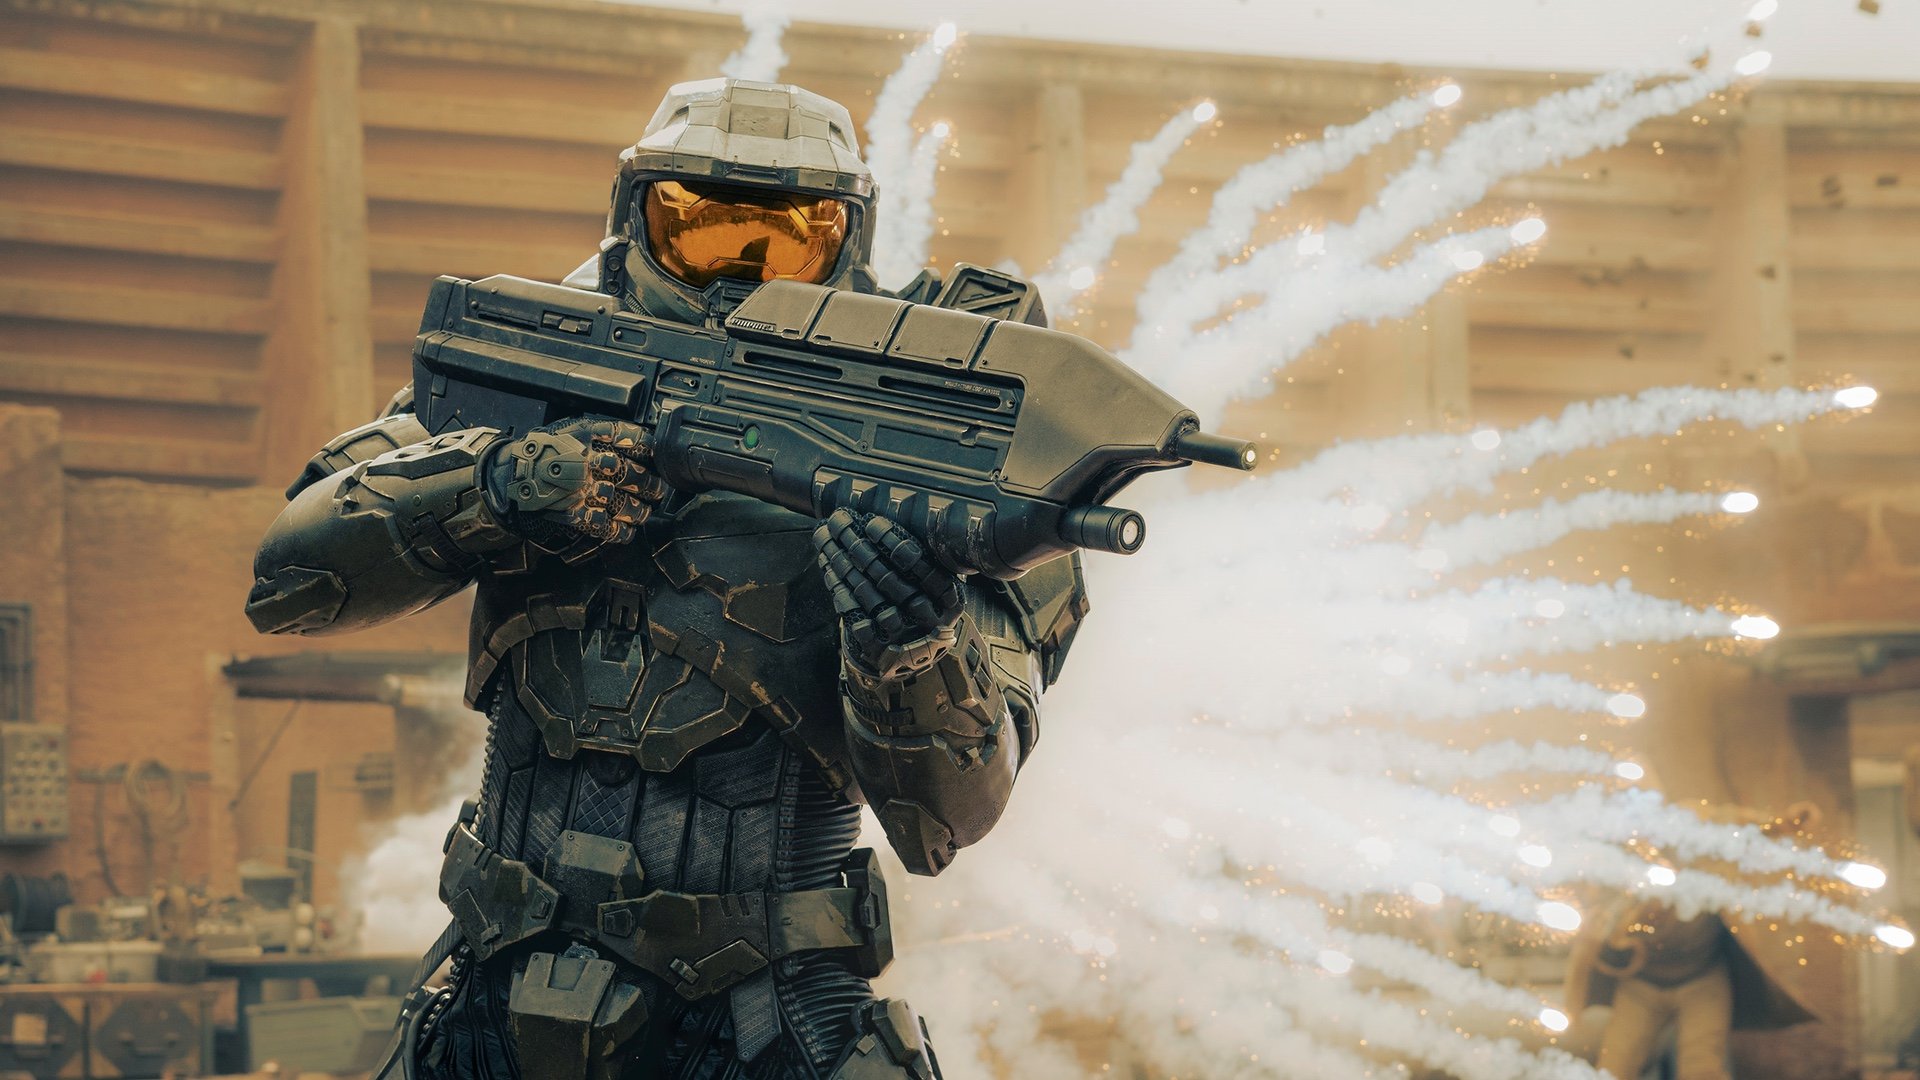 Opens with Master Chief not wearing a helmet: Halo Fans Trashes